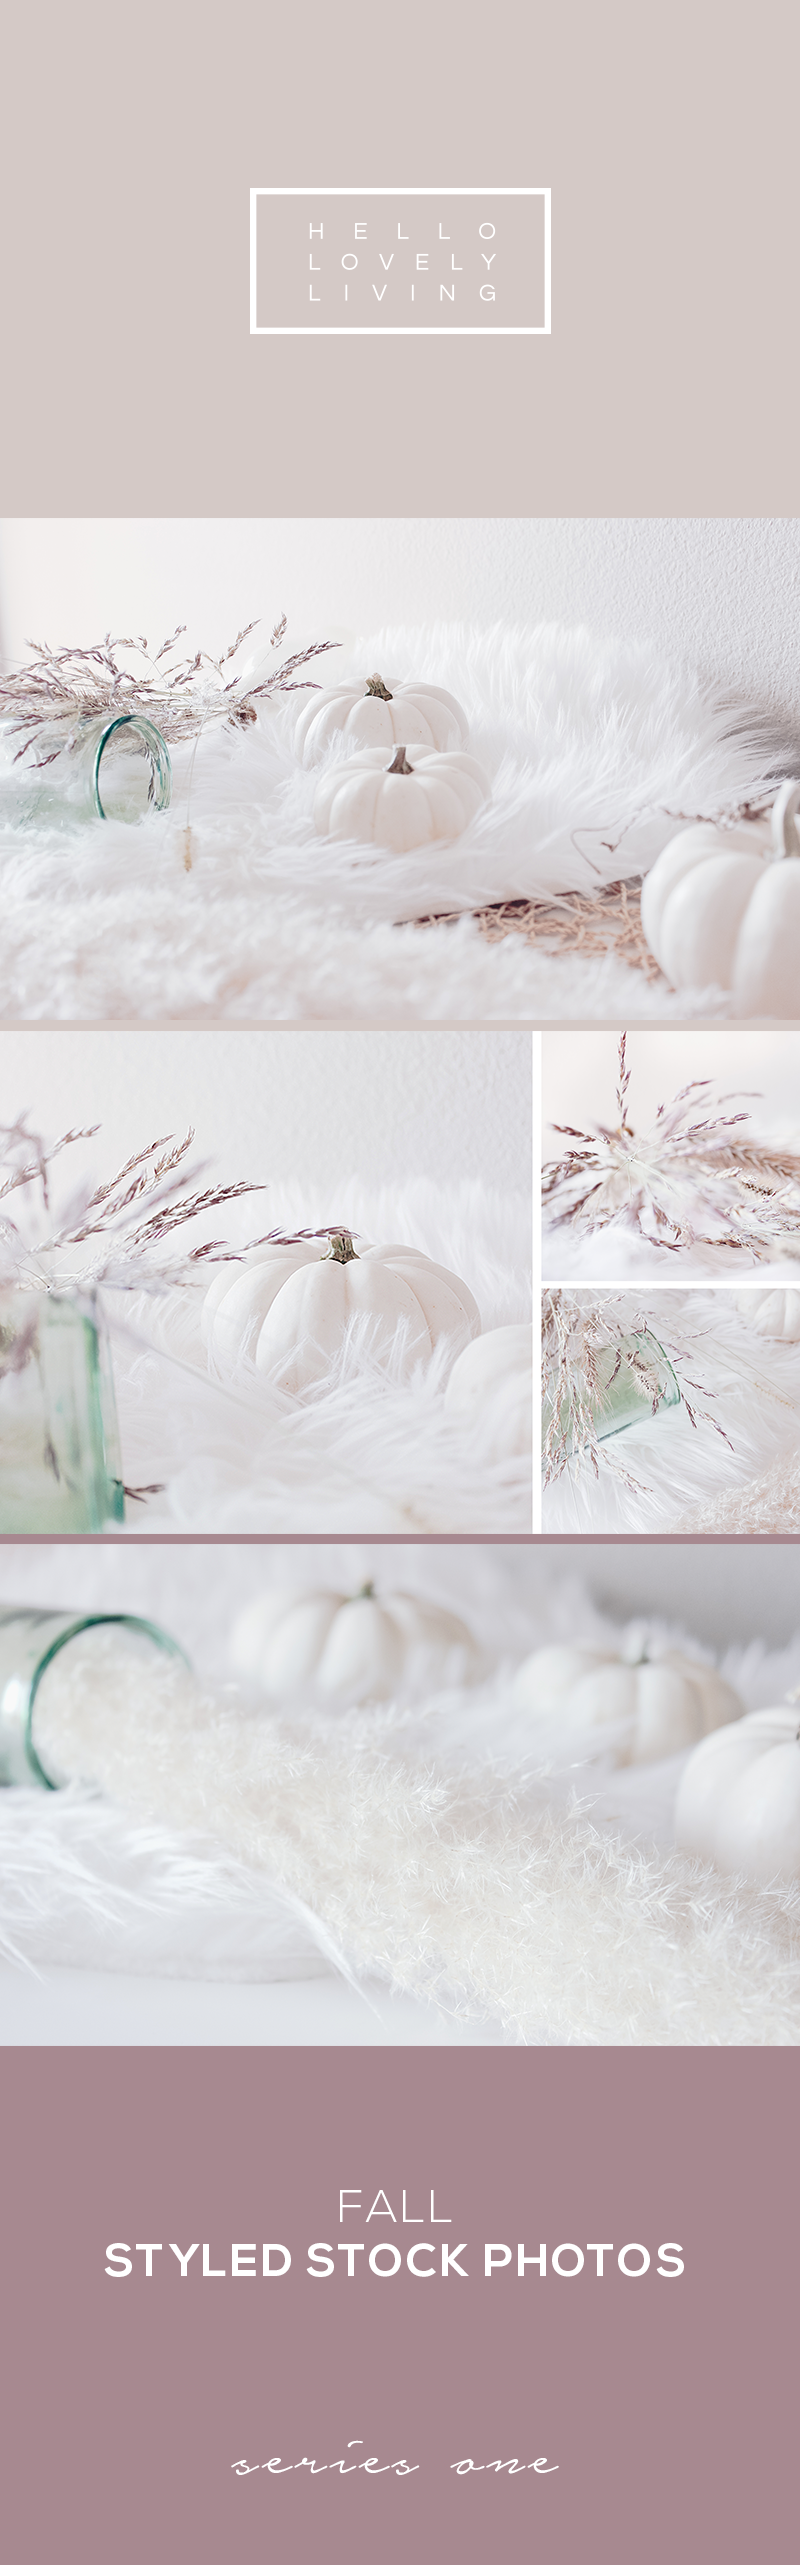 hello-lovely-living-styled-stock-fall-1.png